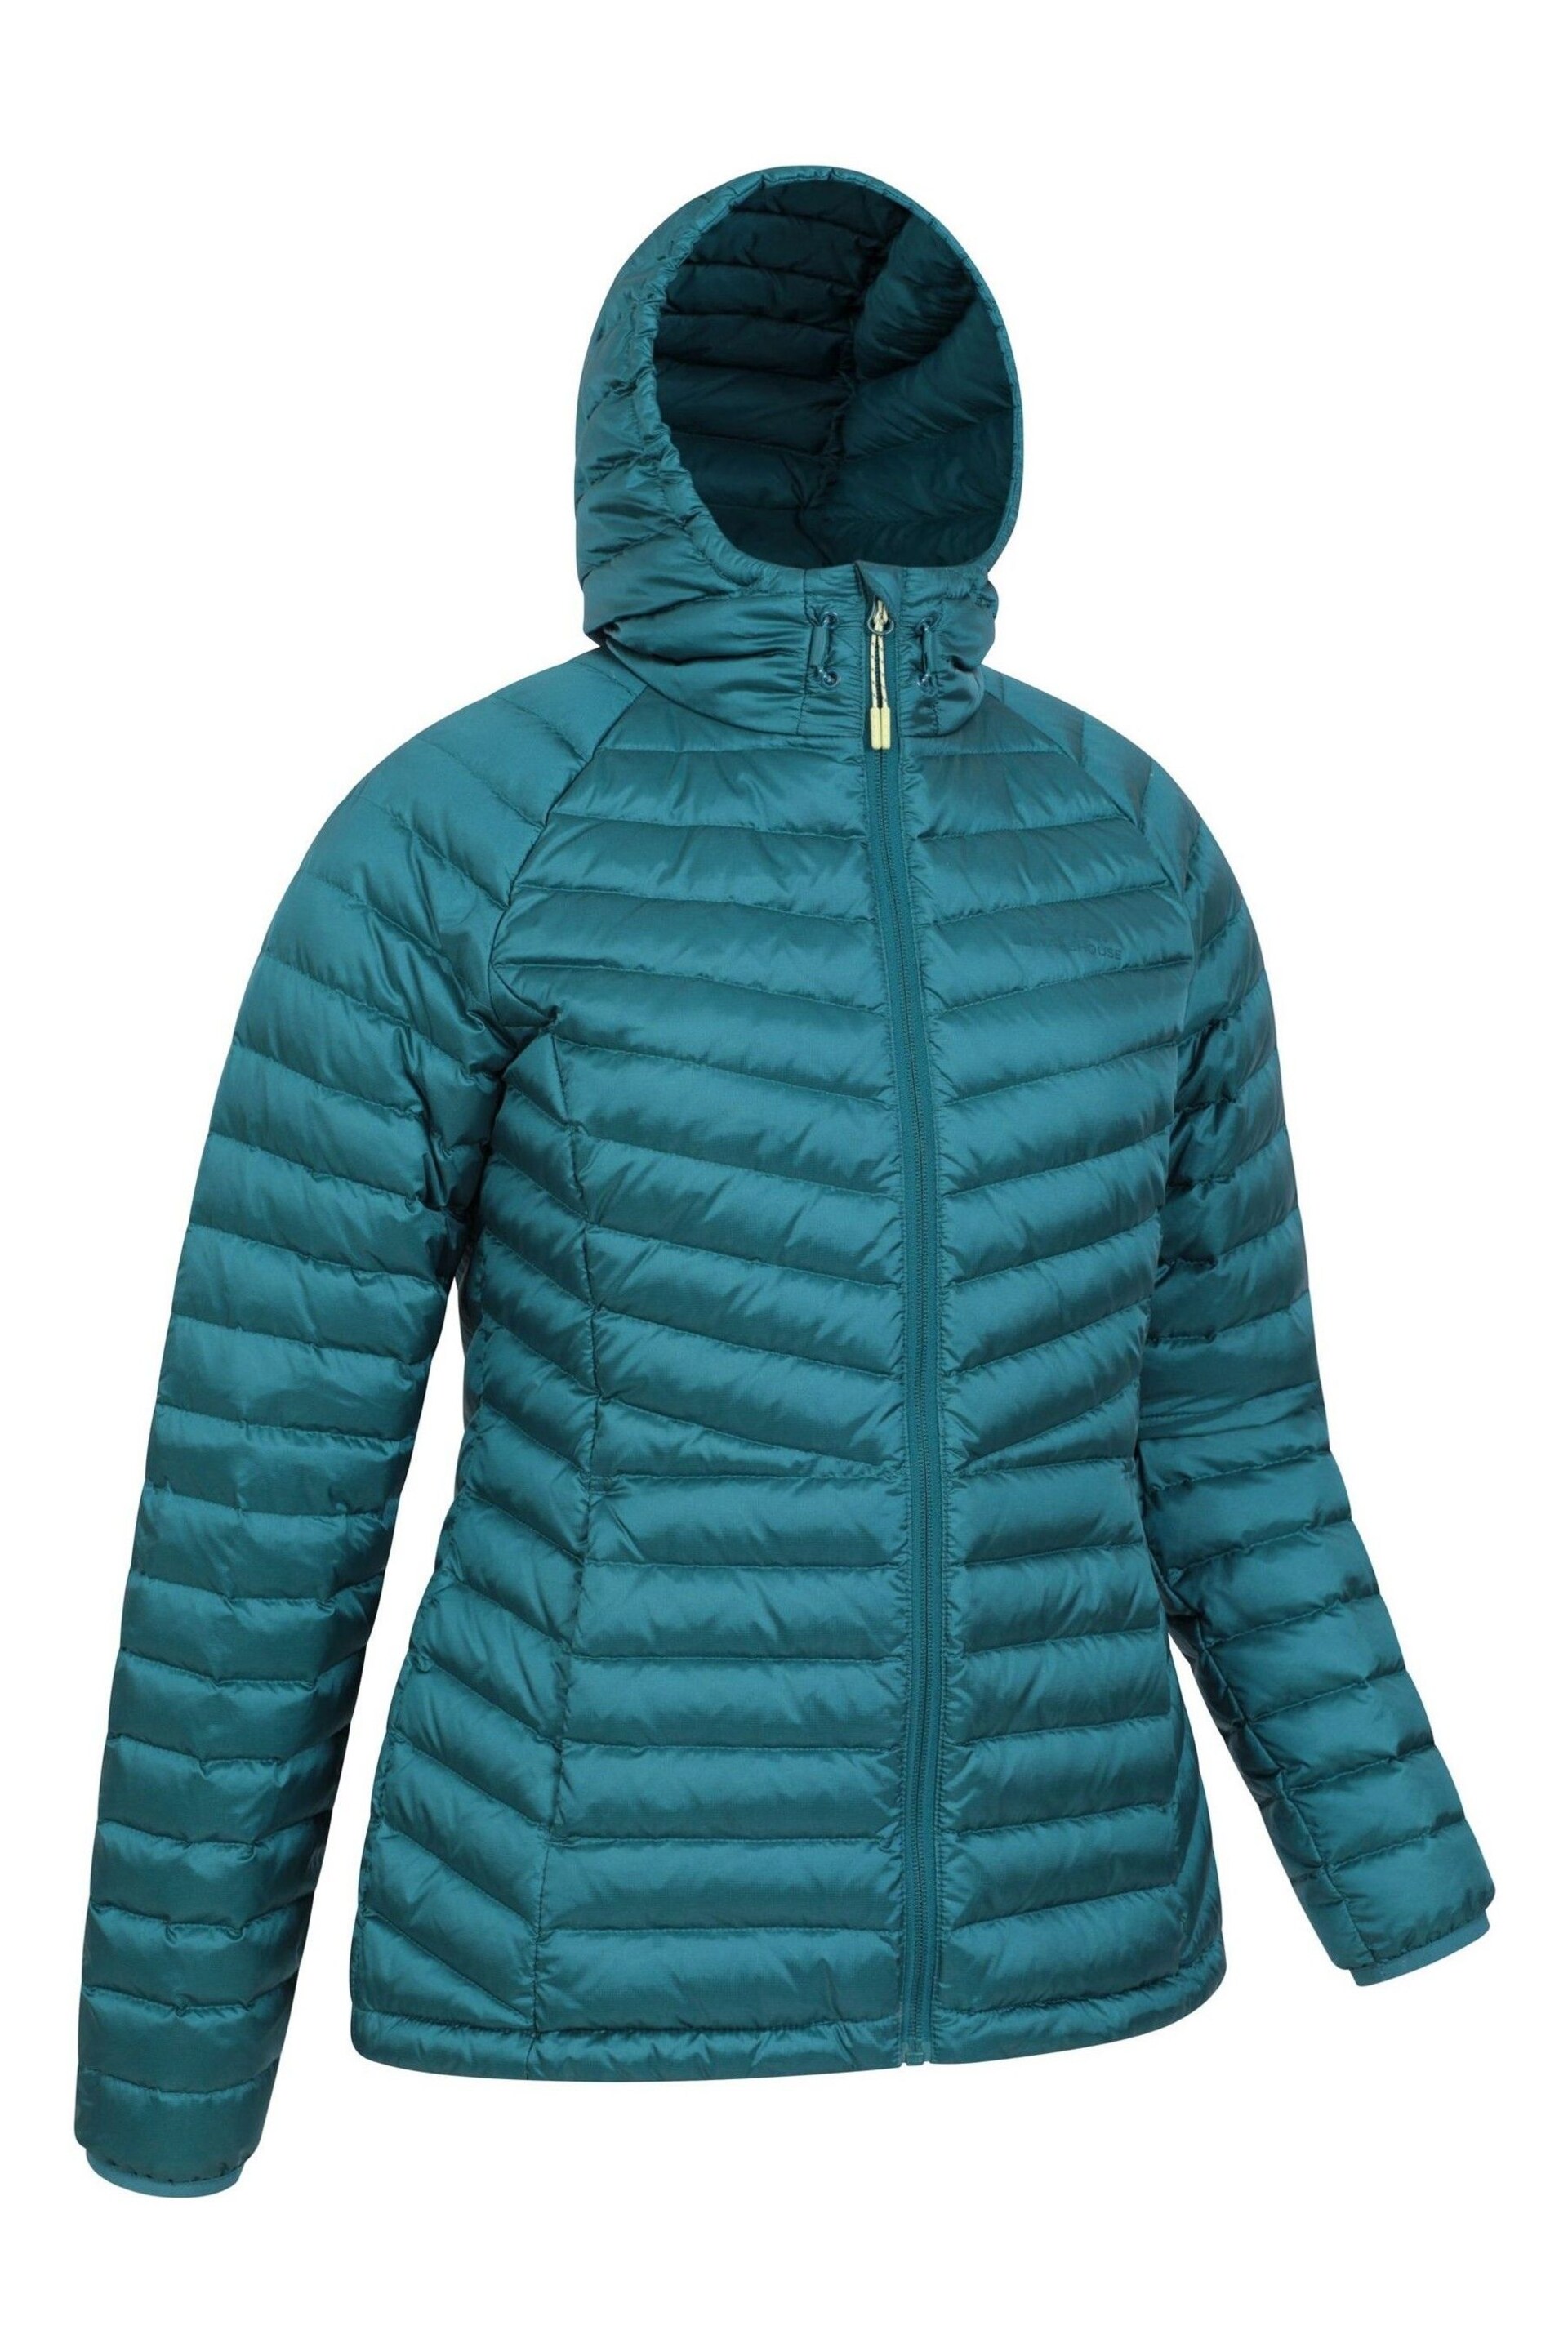 Mountain Warehouse Blue Womens Skyline Extreme Water Resistant Down Jacket - Image 4 of 9